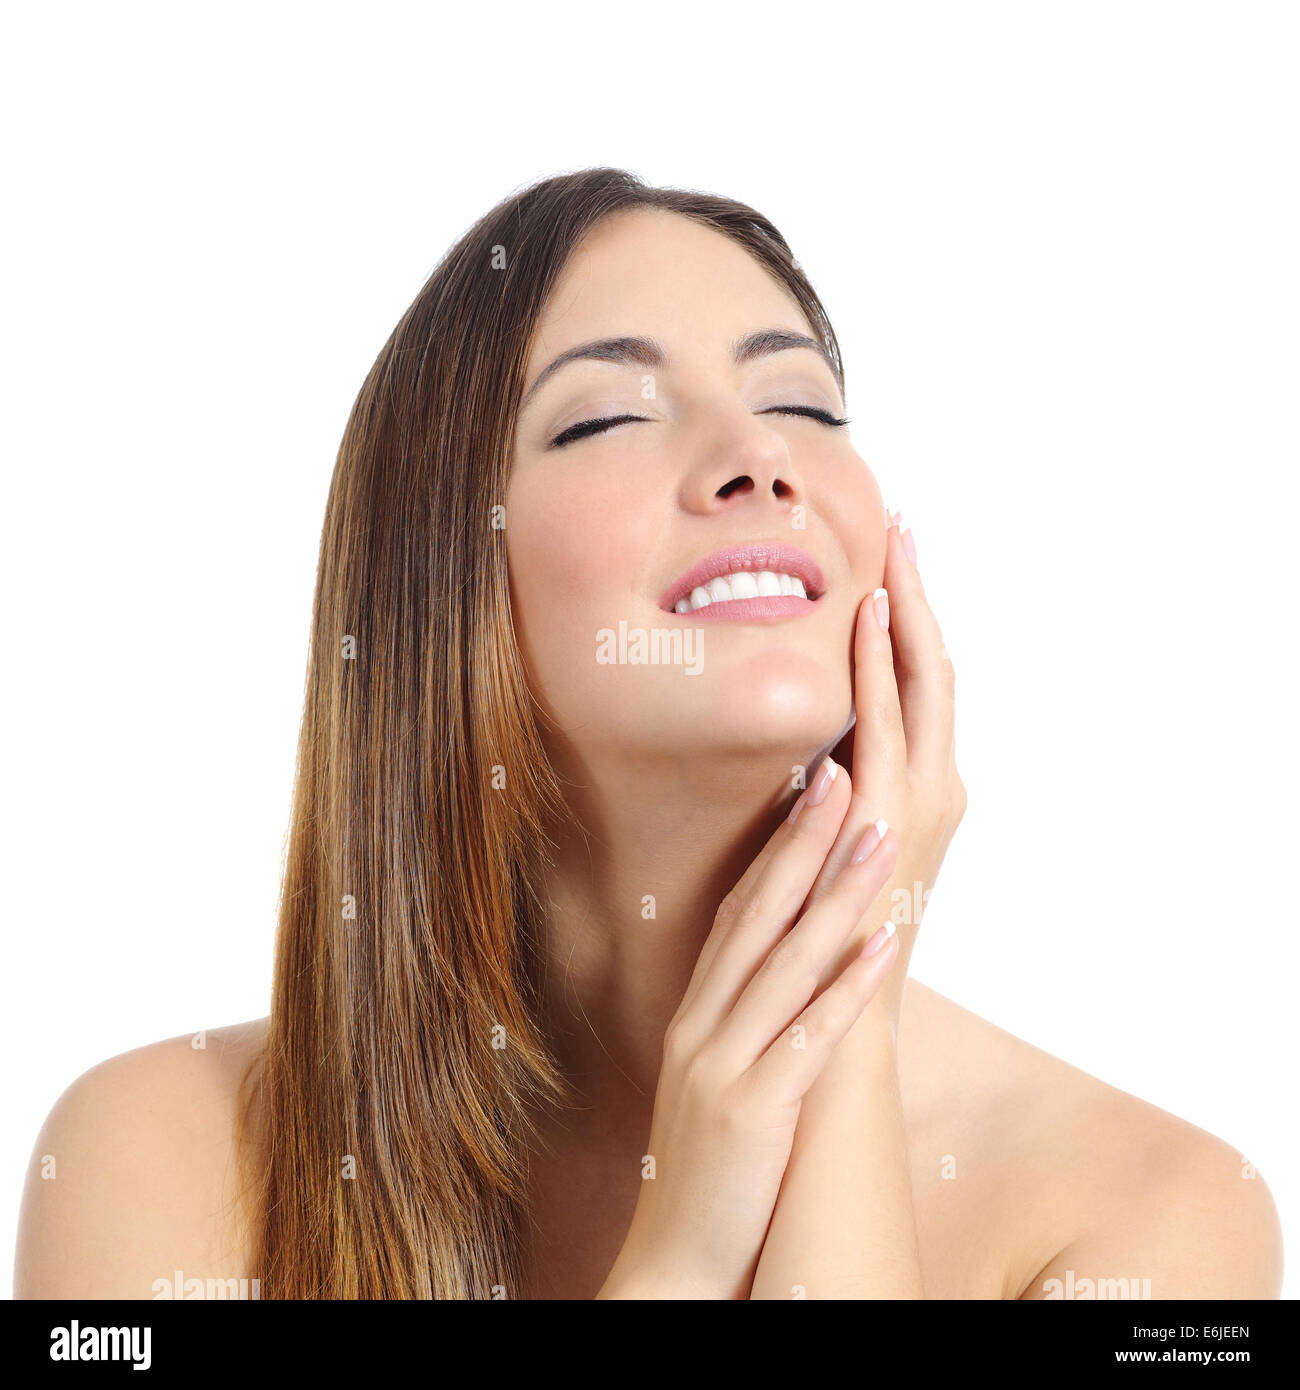 Beauty woman with perfect skin and manicure and white smile isolated on a white background Stock Photo